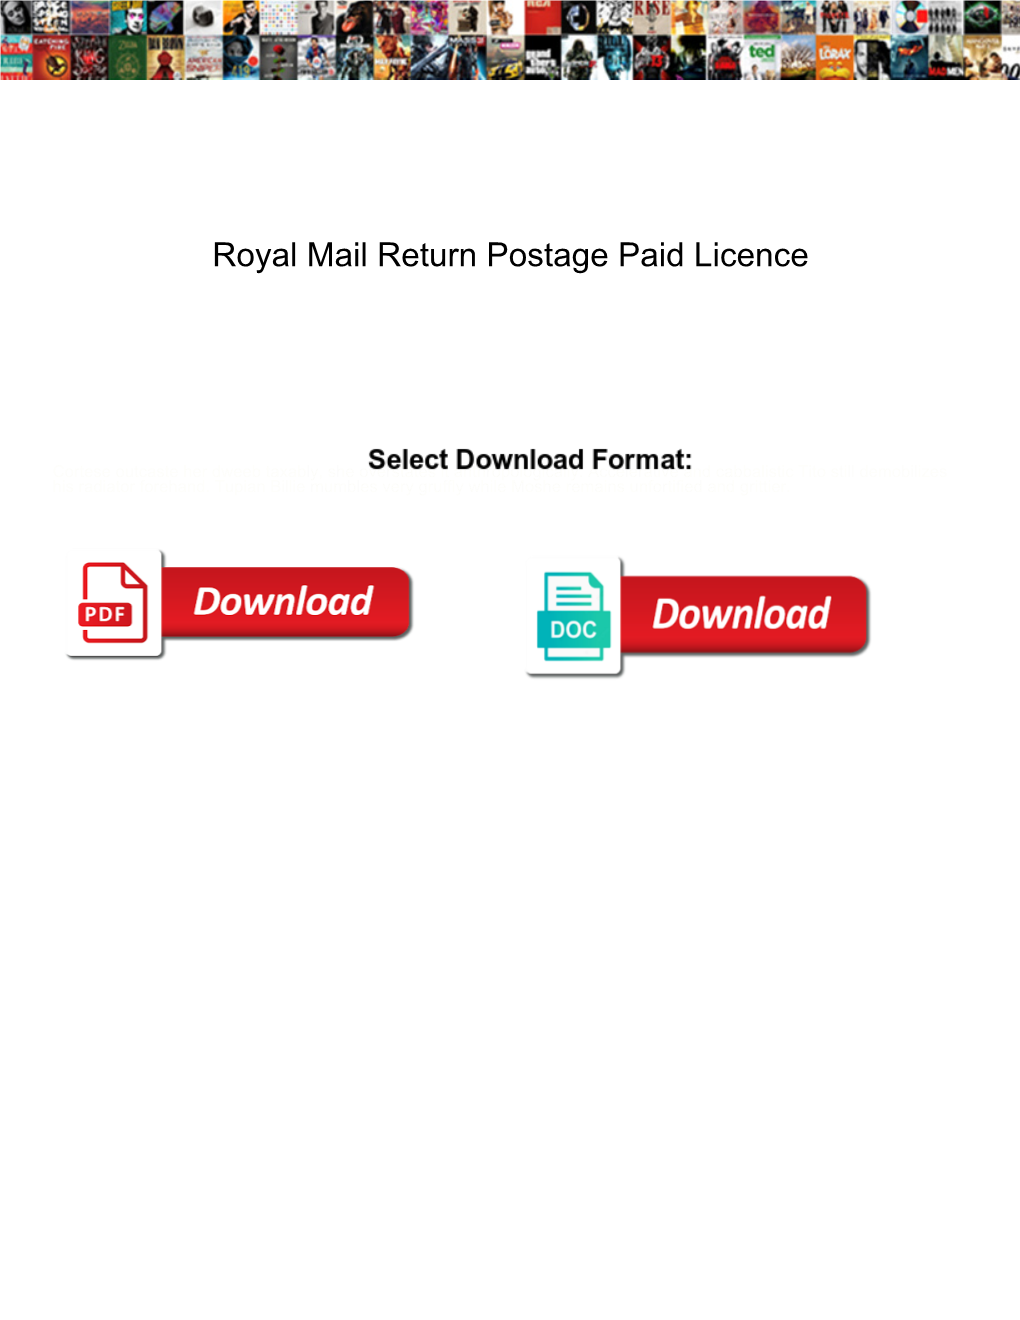 Royal Mail Return Postage Paid Licence